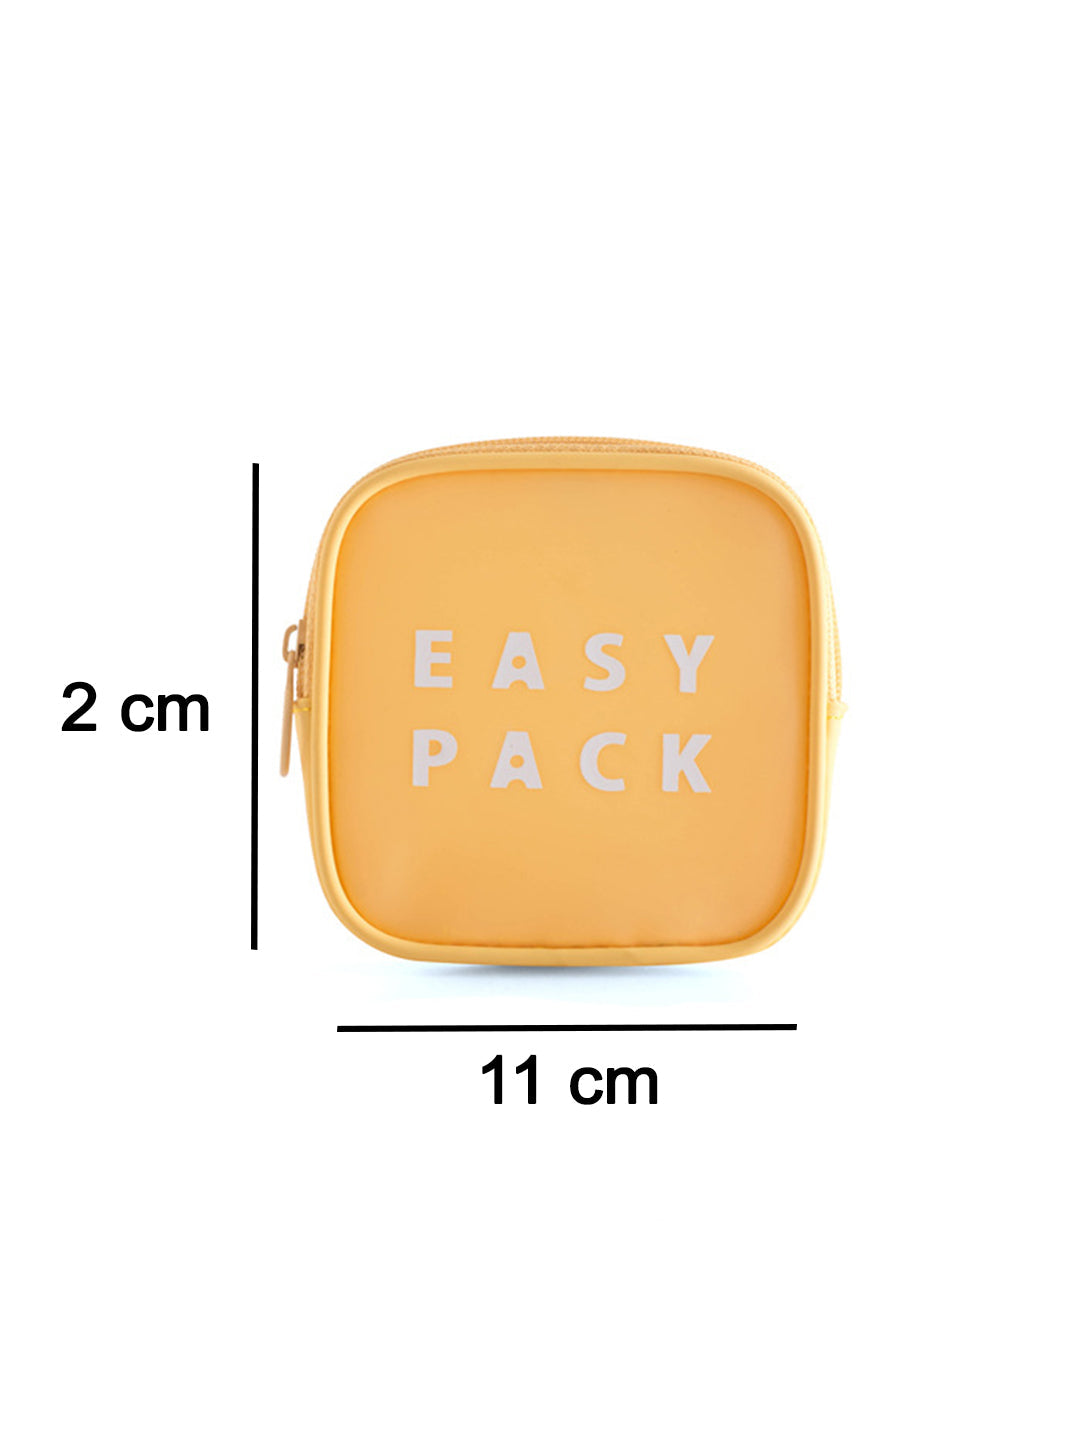 VON CASA Square Plastic Travel Pouch - Easy Pack - Yellow